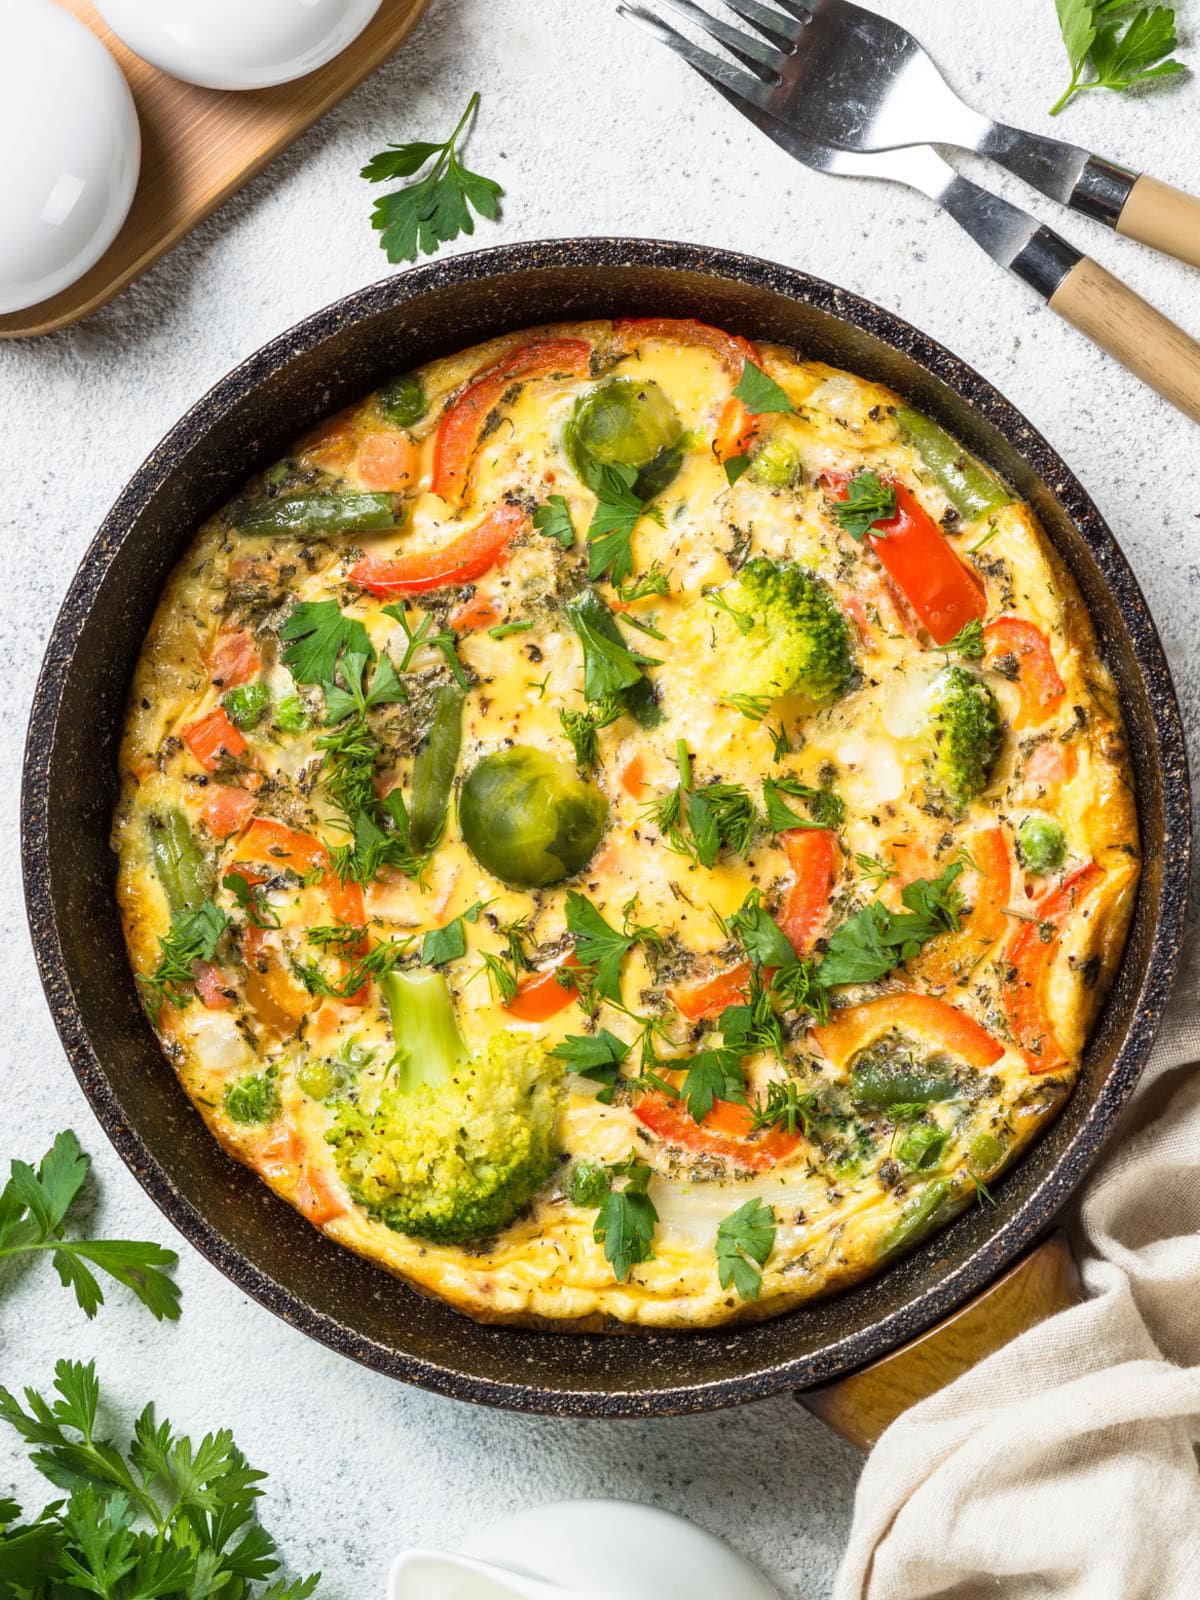 Frittata vs Omelette are two of the most common egg dishes. They are both simple to make, but there are some differences between them.